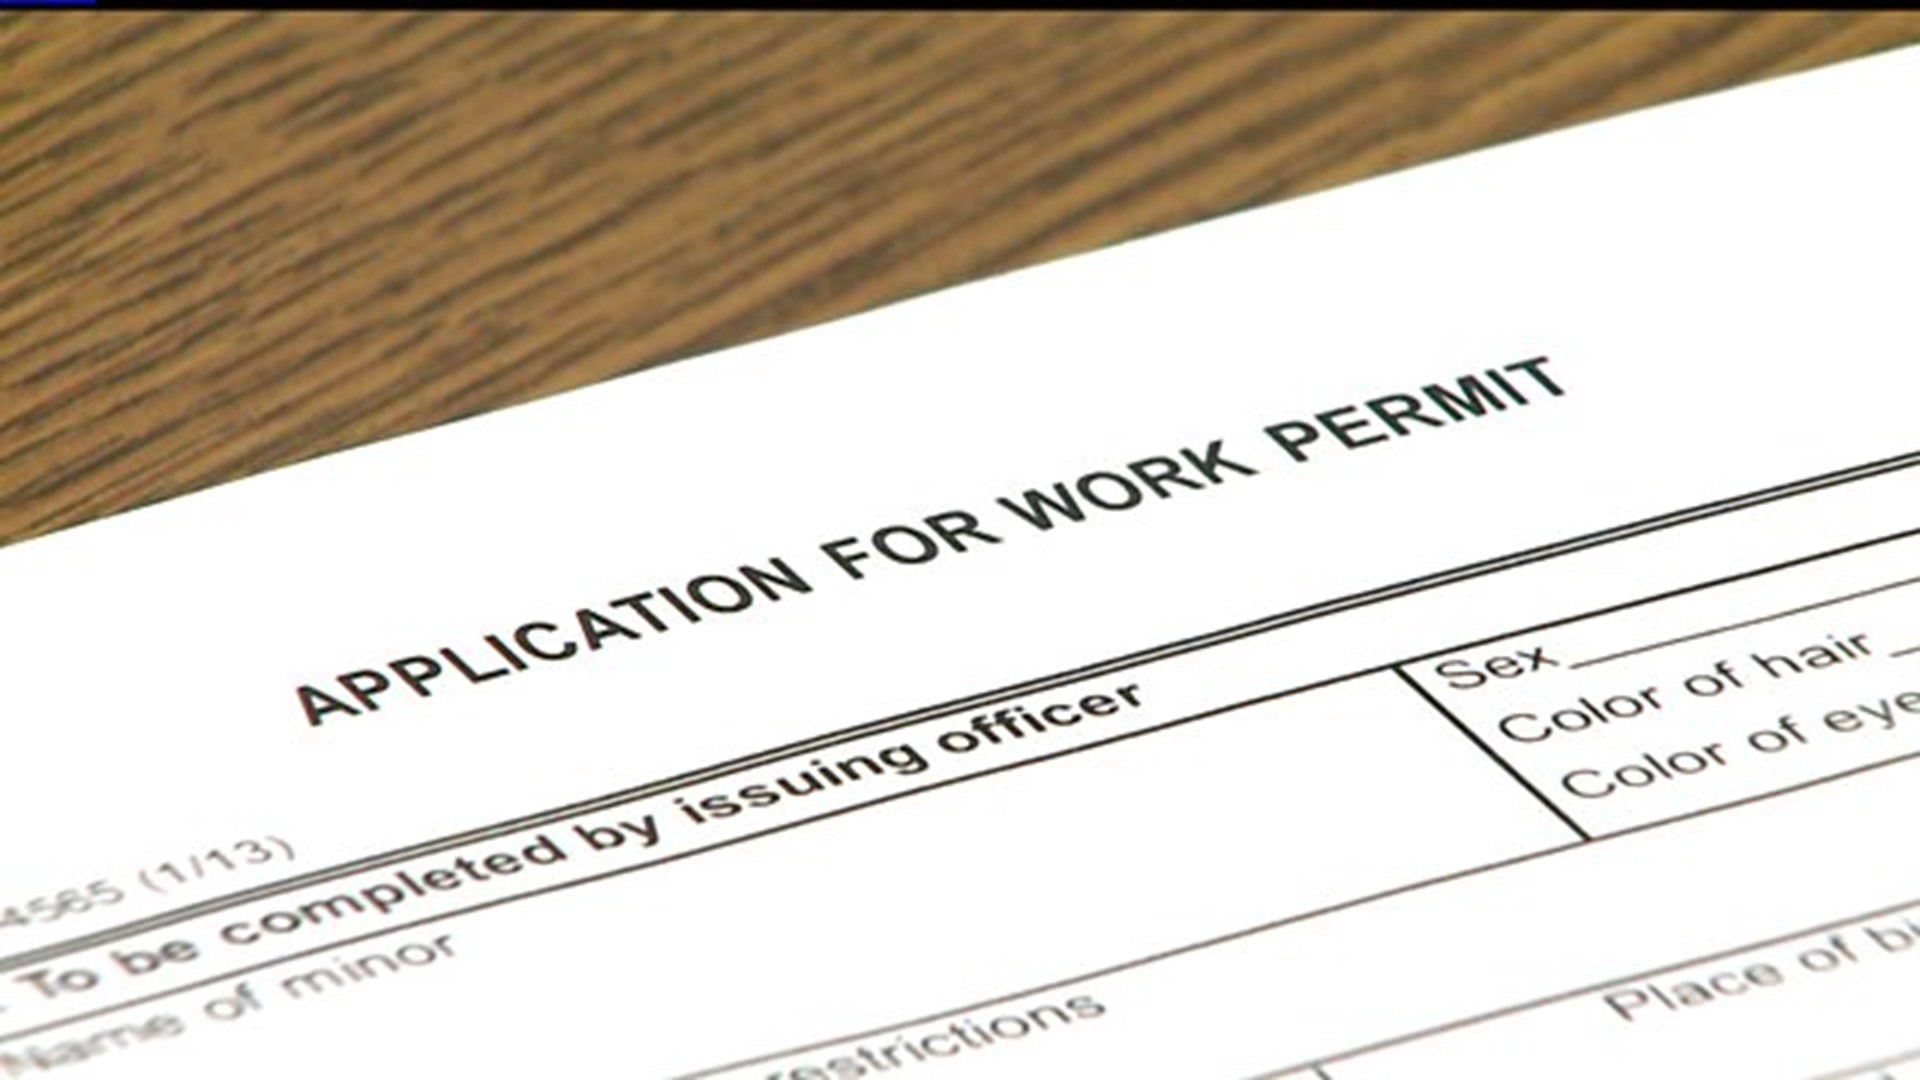 Teenwork: How and Where to Obtain a Work Permit for Teens